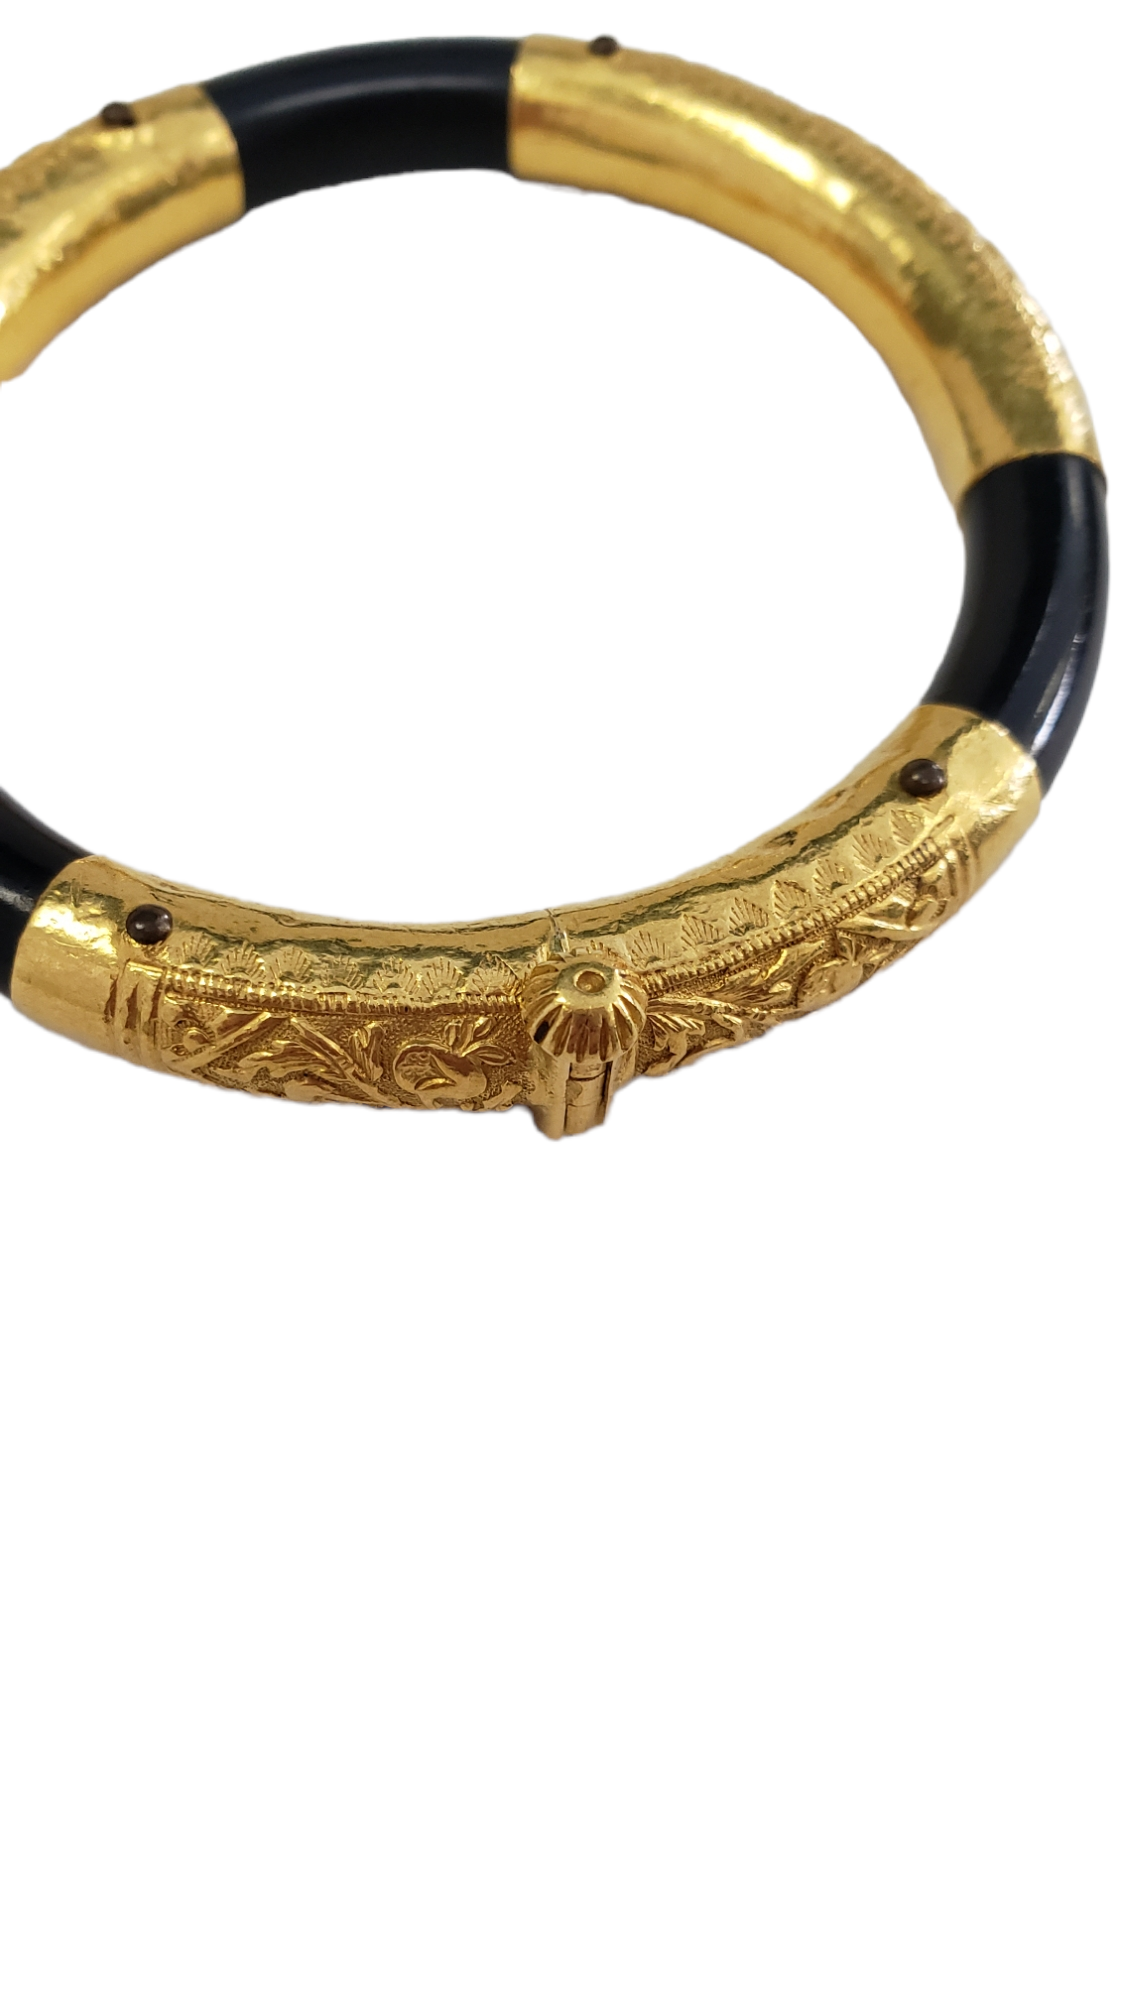 Black Onyx Hand-Carved Bangle Bracelet made with Hollow 22-Karat Yellow Gold